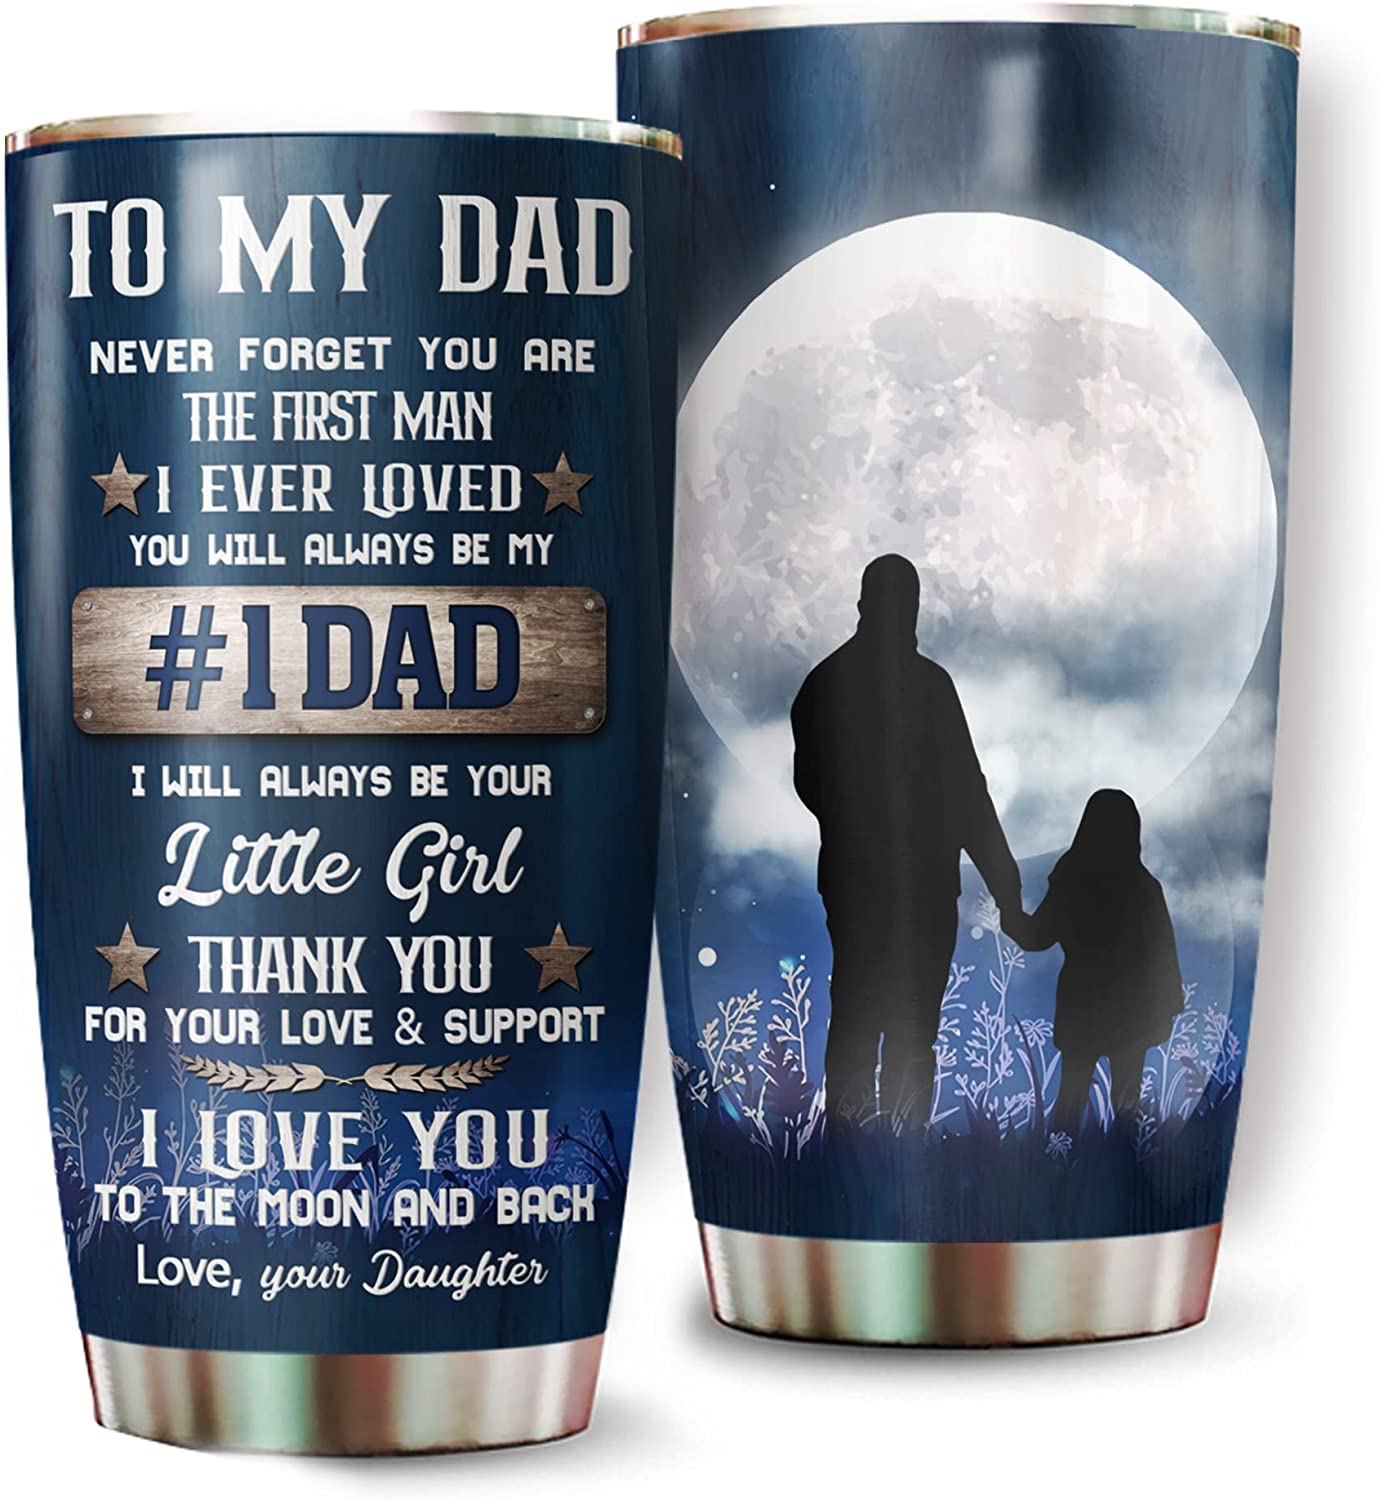 New Dad Gift – BeWishedGifts